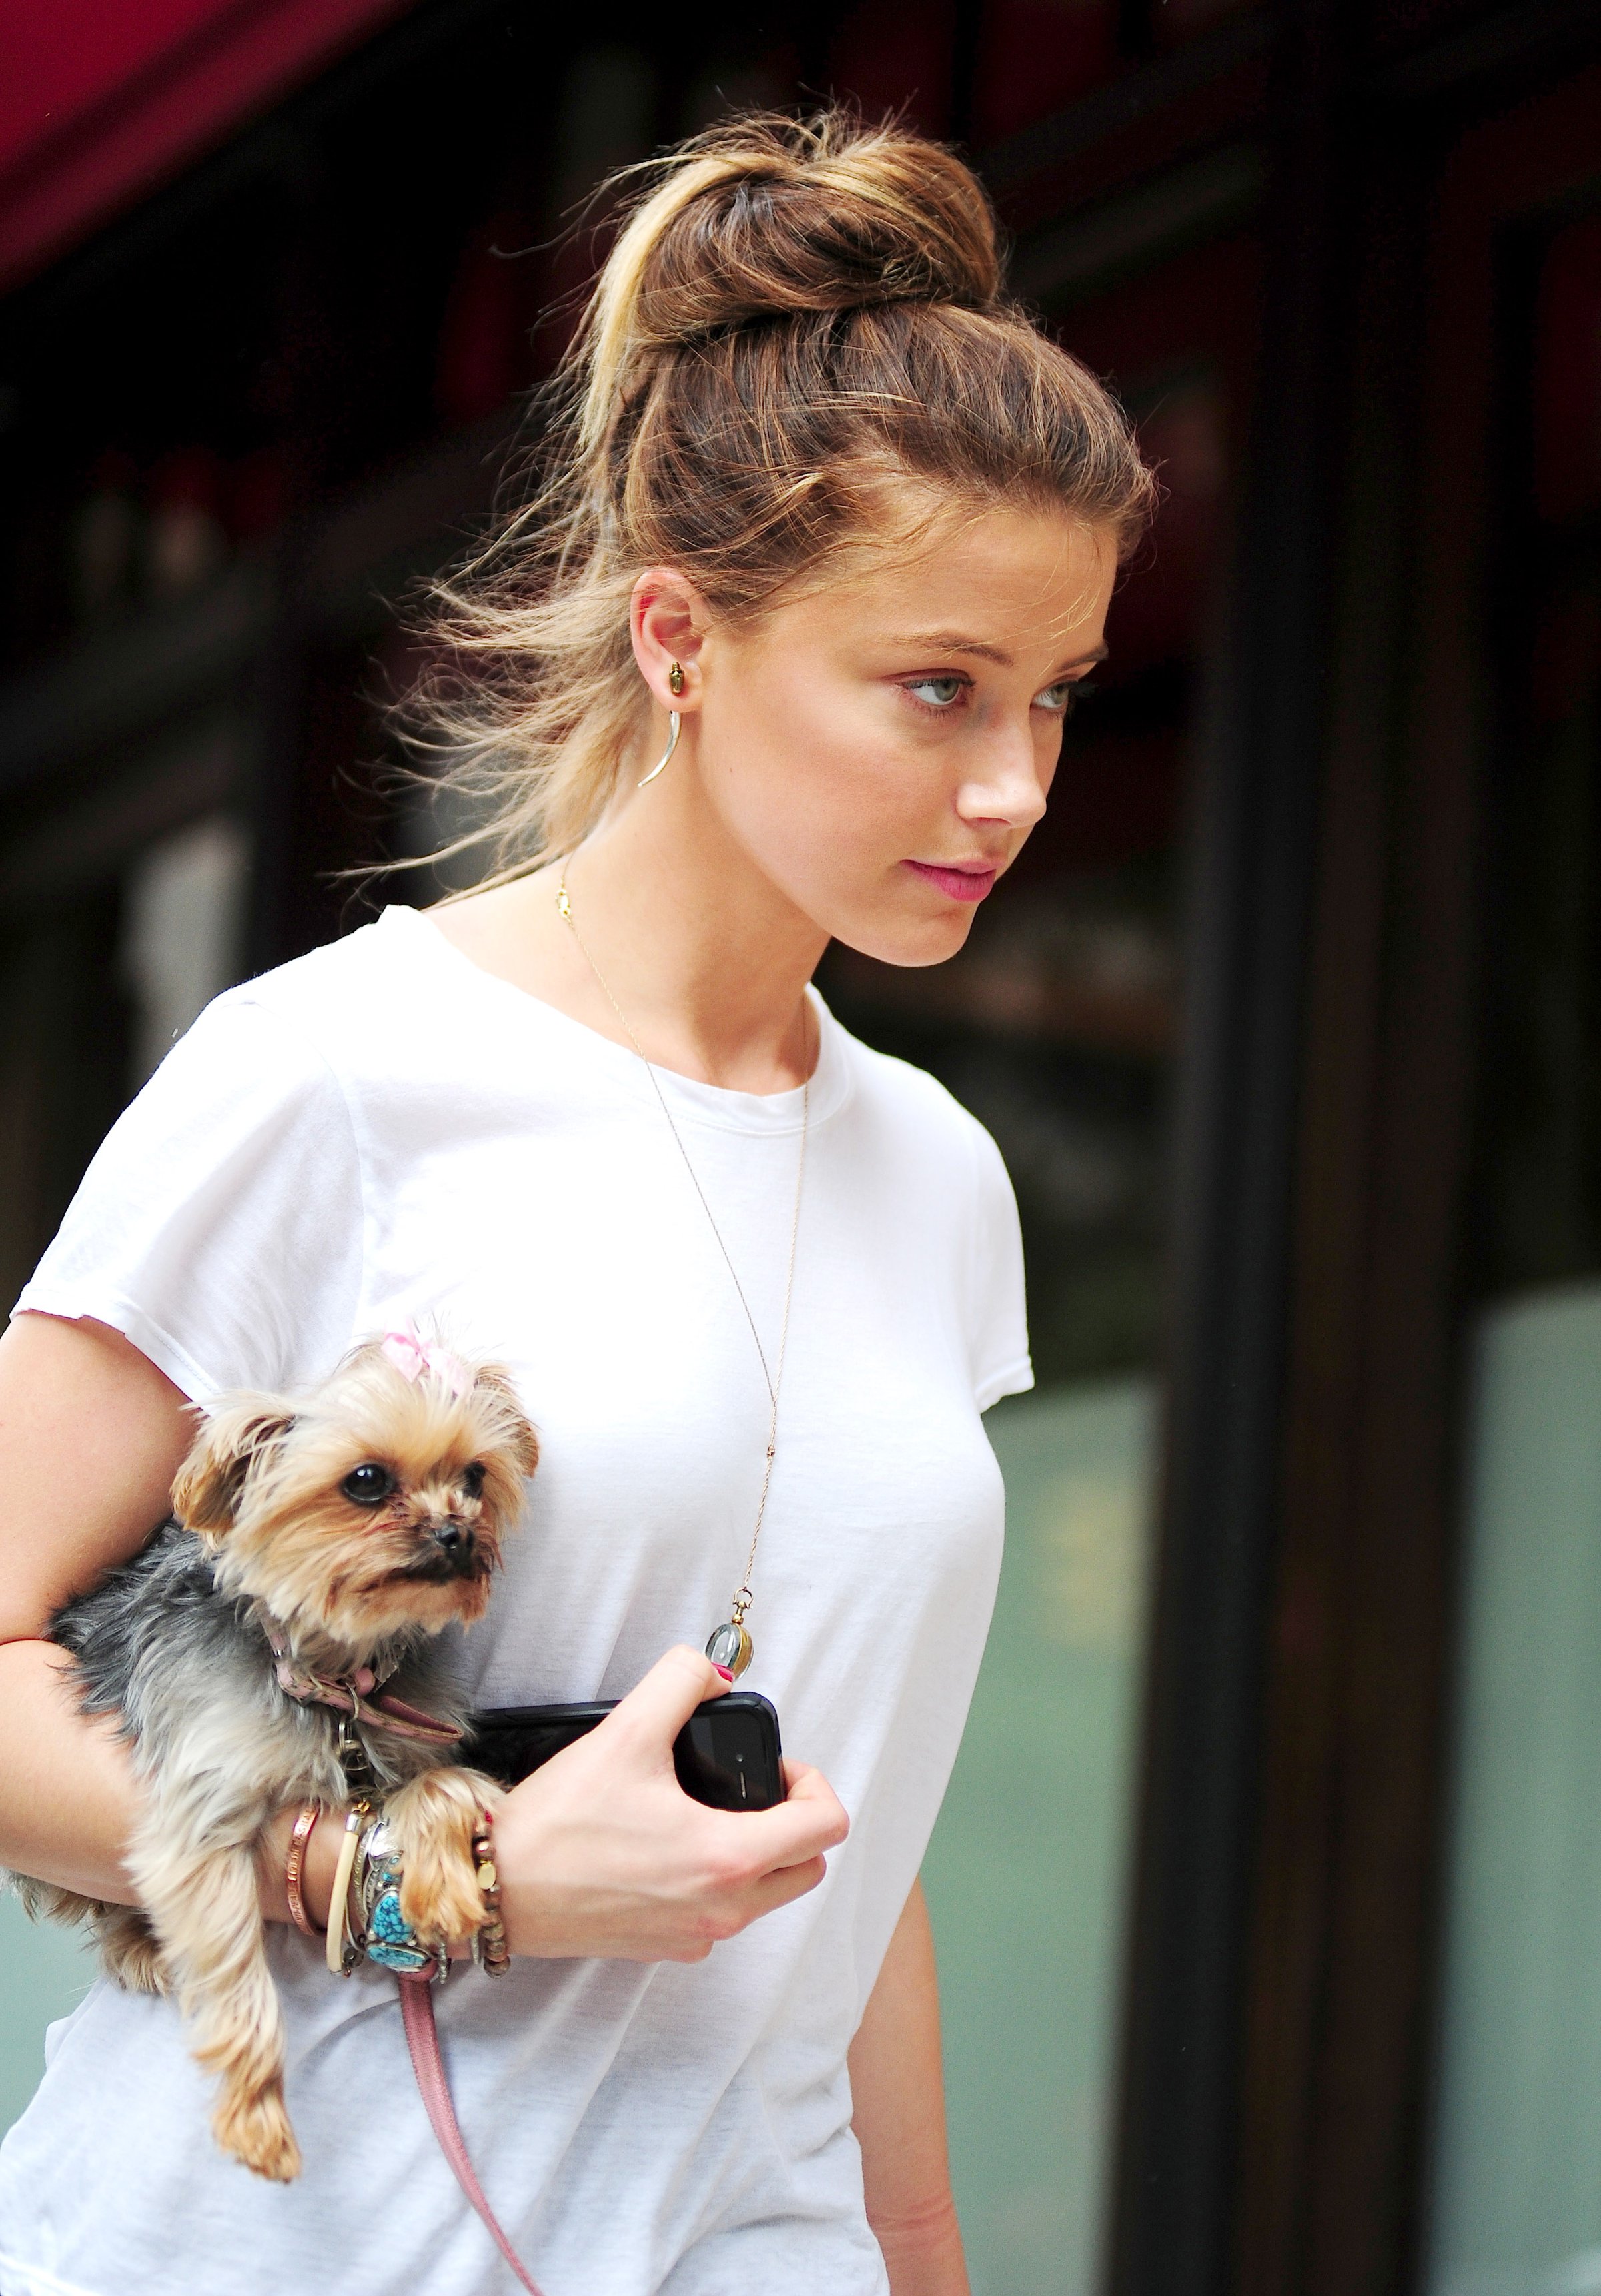 NEW YORK, NY - AUGUST 27: Amber Heard is seen in tribeca on the streets of Manhattan on August 27, 2012 in New York City. (Photo by Alo Ceballos/FilmMagic)